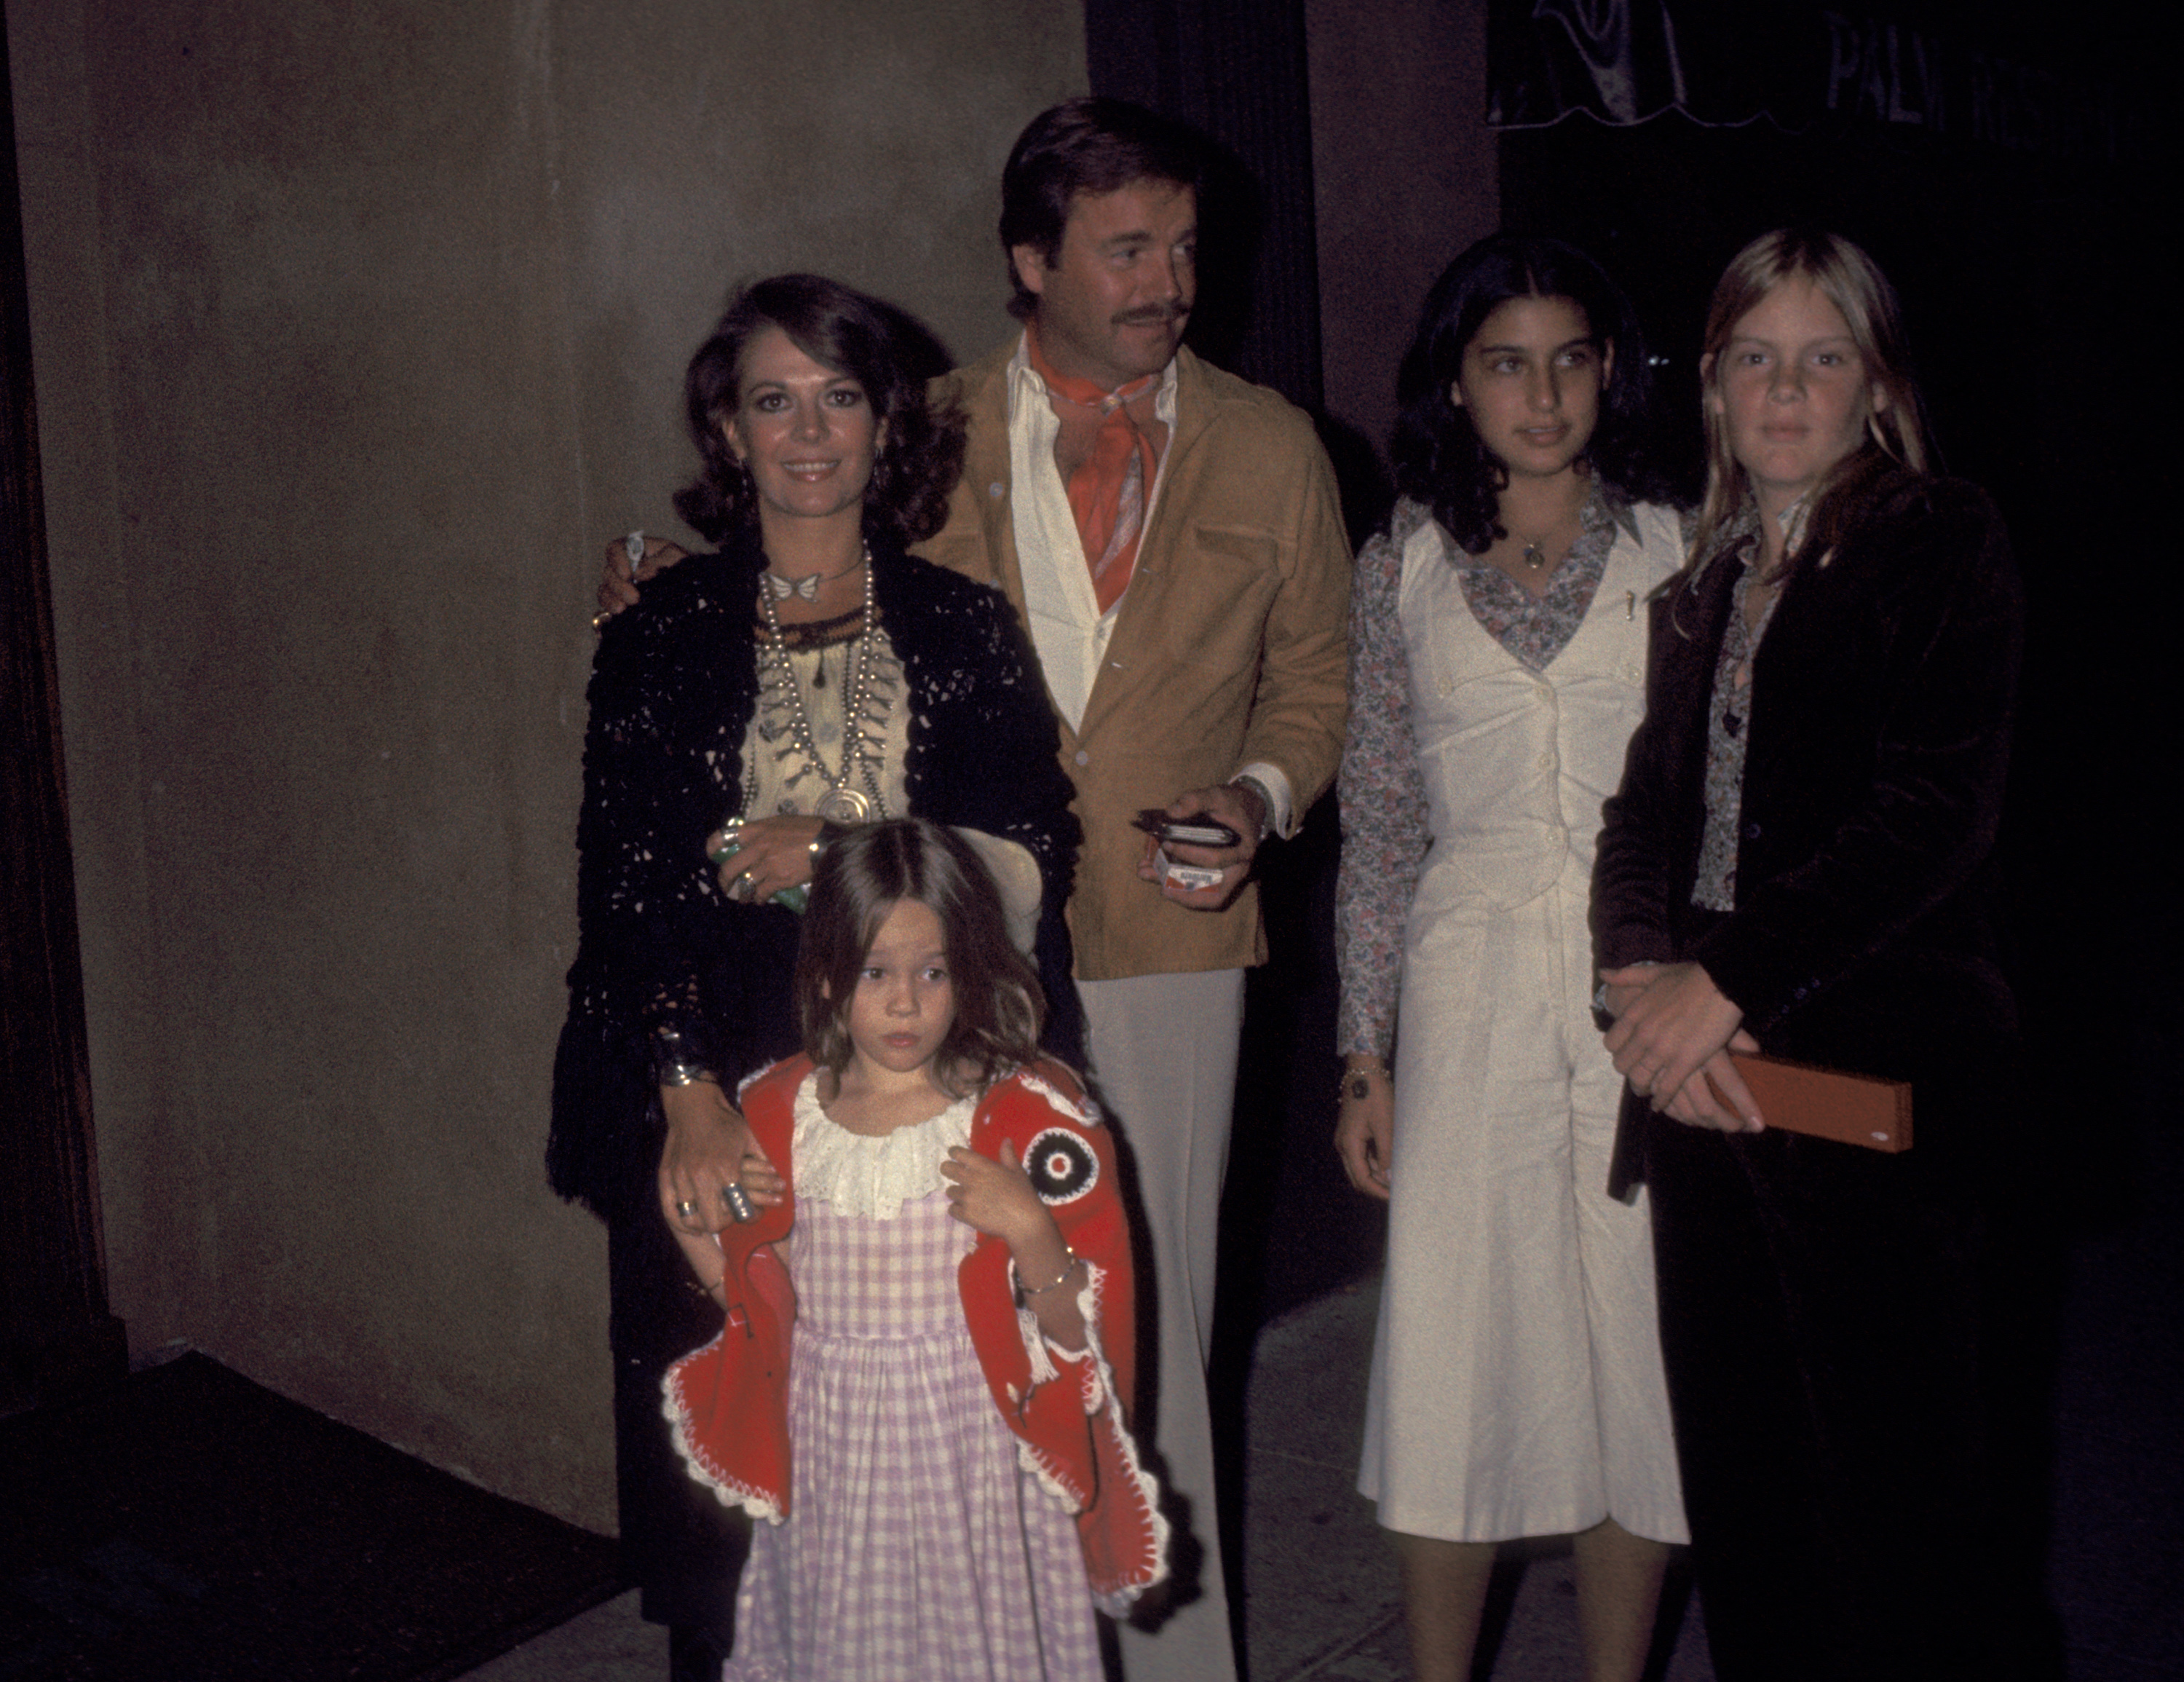 Natalie Wood, Robert Wagner and Daughters Natasha Gregson Wagner, and Katie Wagner on January 1, 1977 | Source: Getty Images